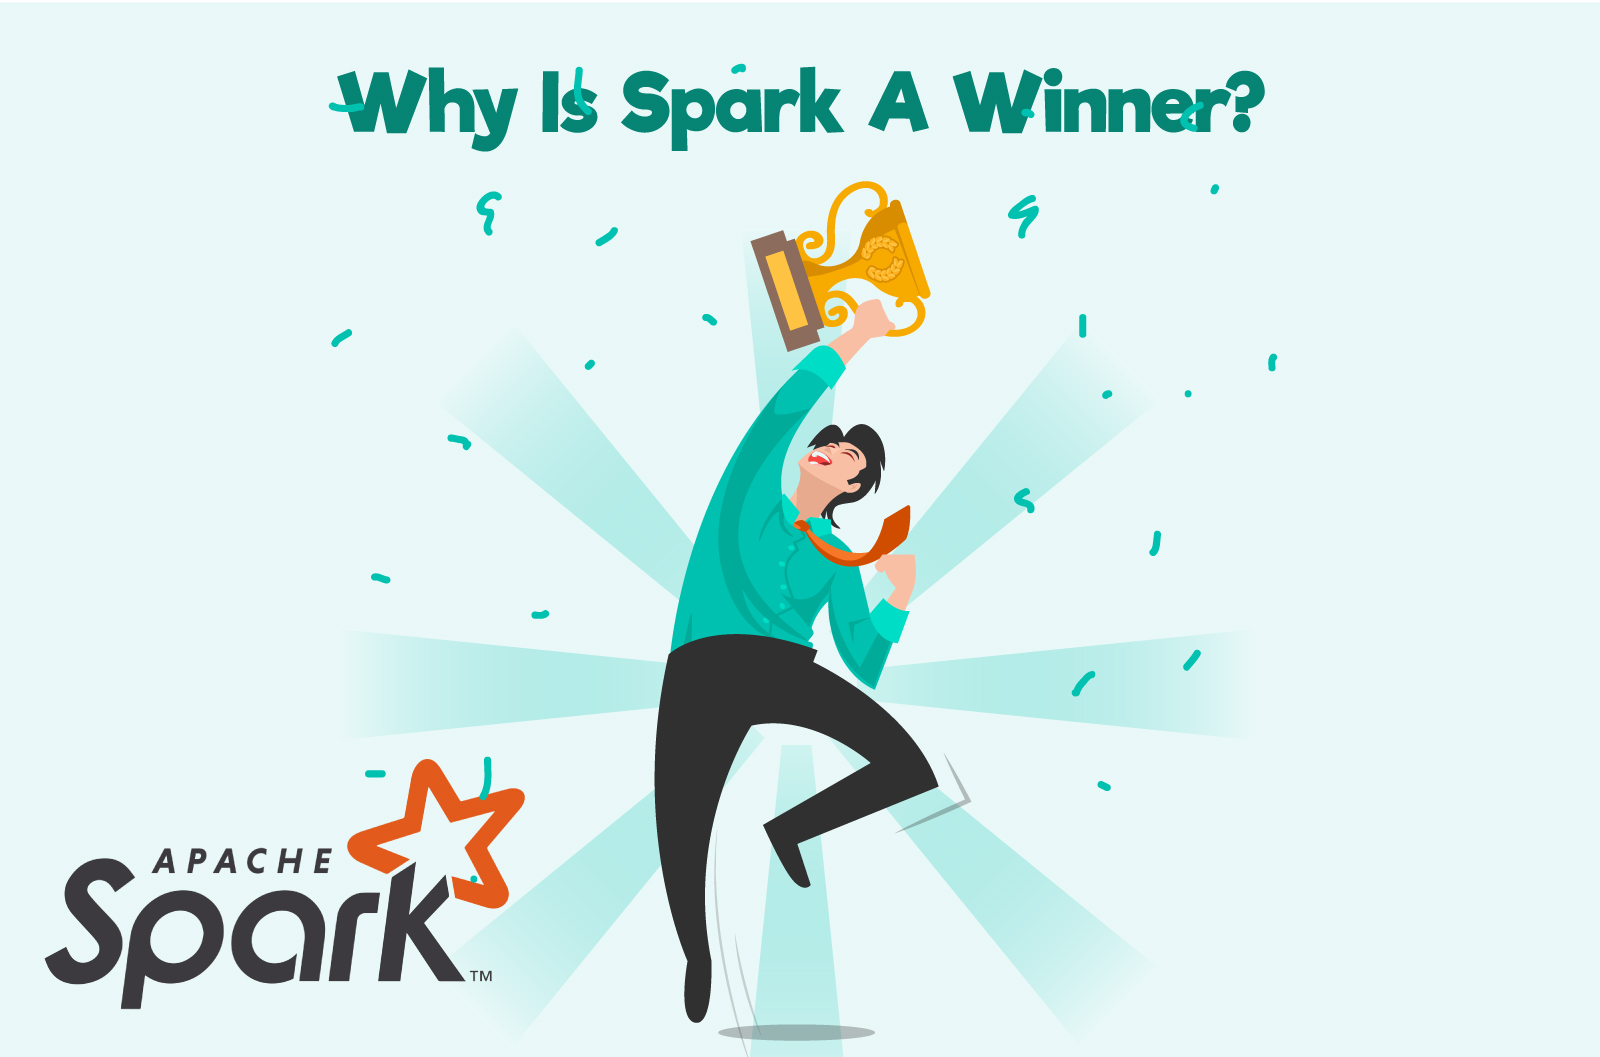 Why is Spark a winner? – The second reason